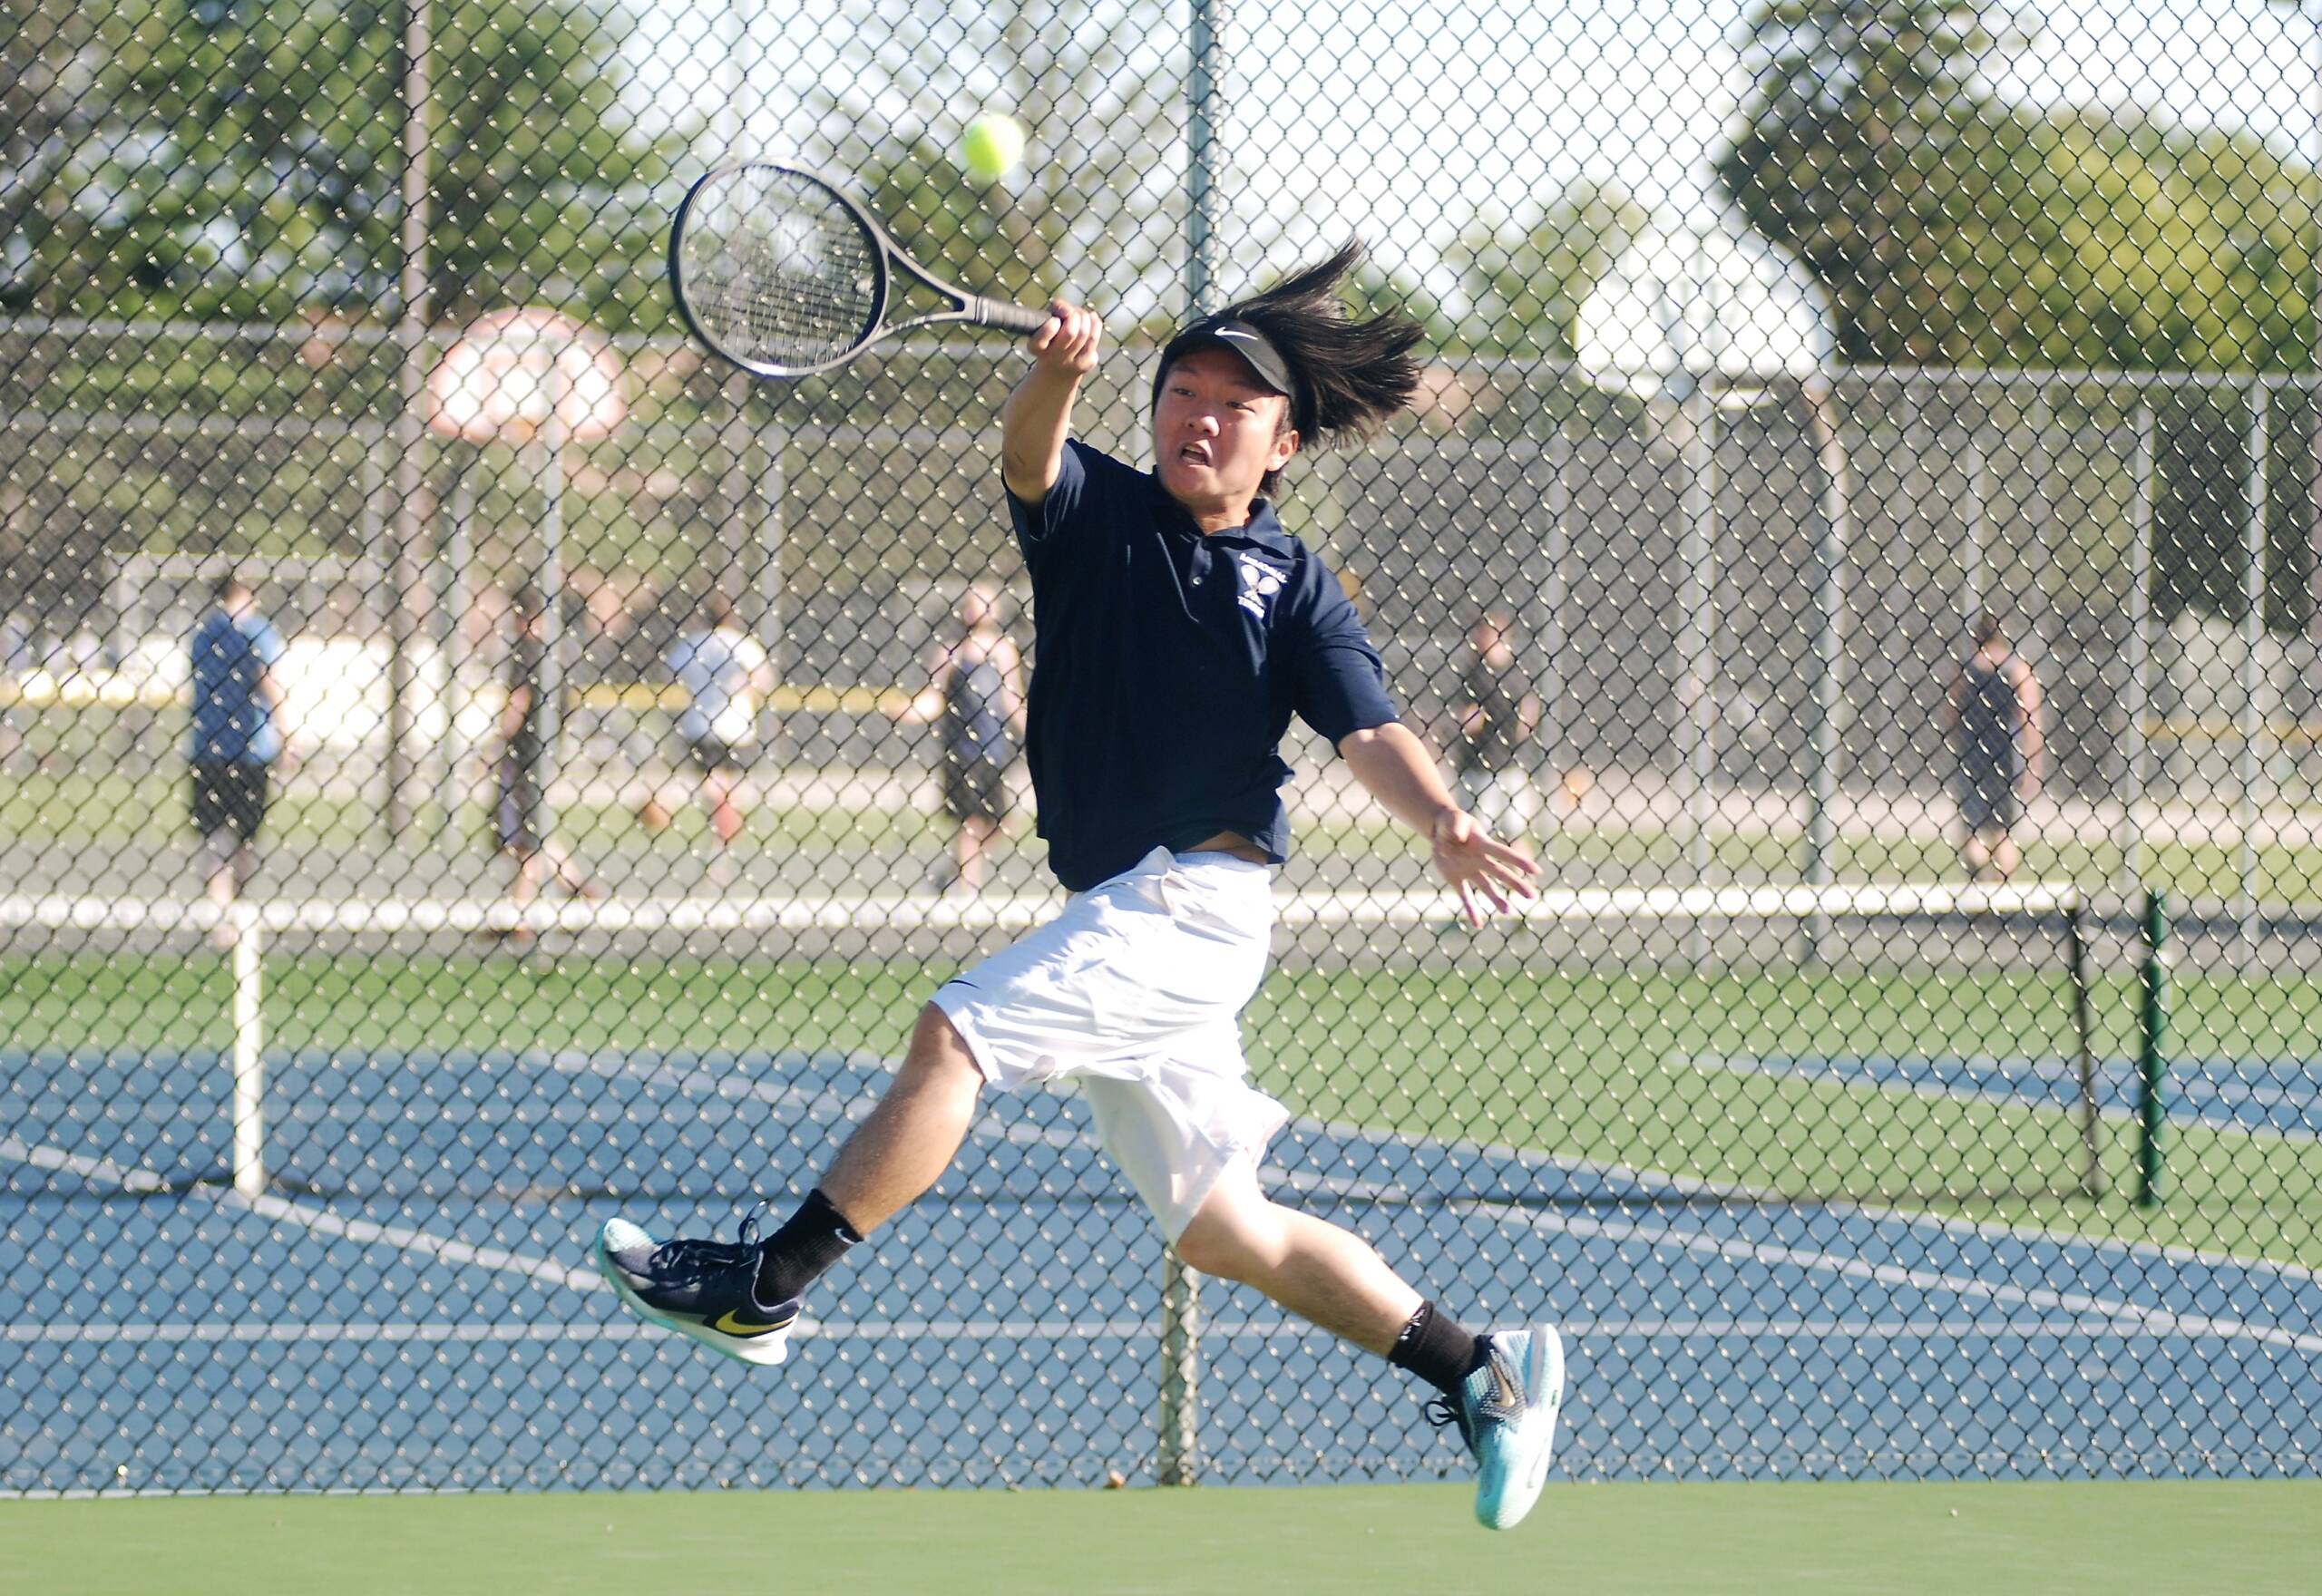 Todd Tran stretching to hit the tennis ball.